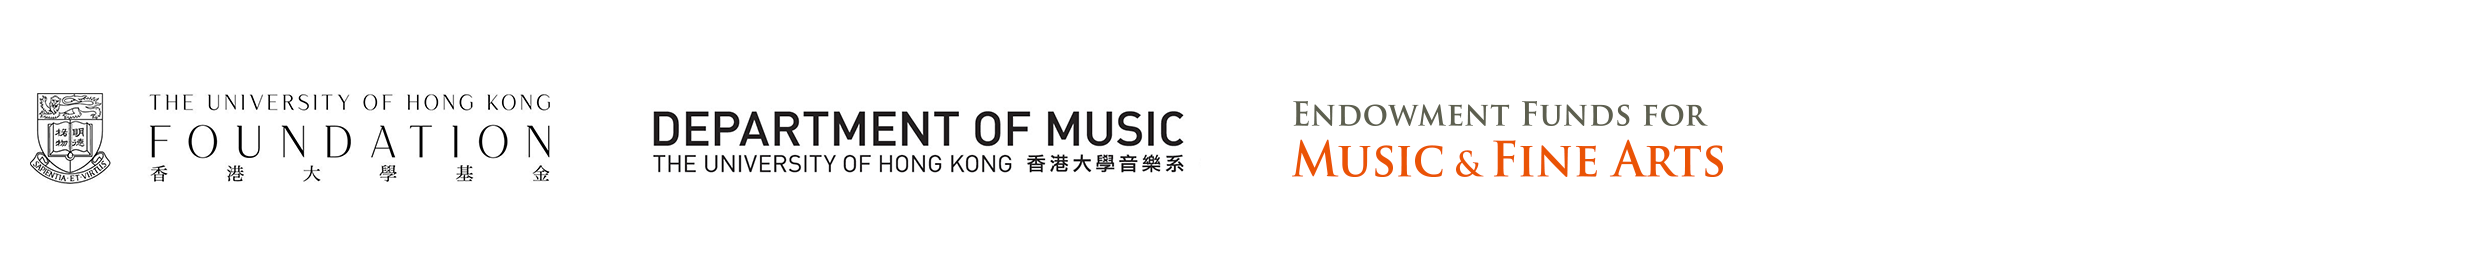 HKU Foundation | Department of Music, HKU | Endowment Fund for Music & Fine Arts